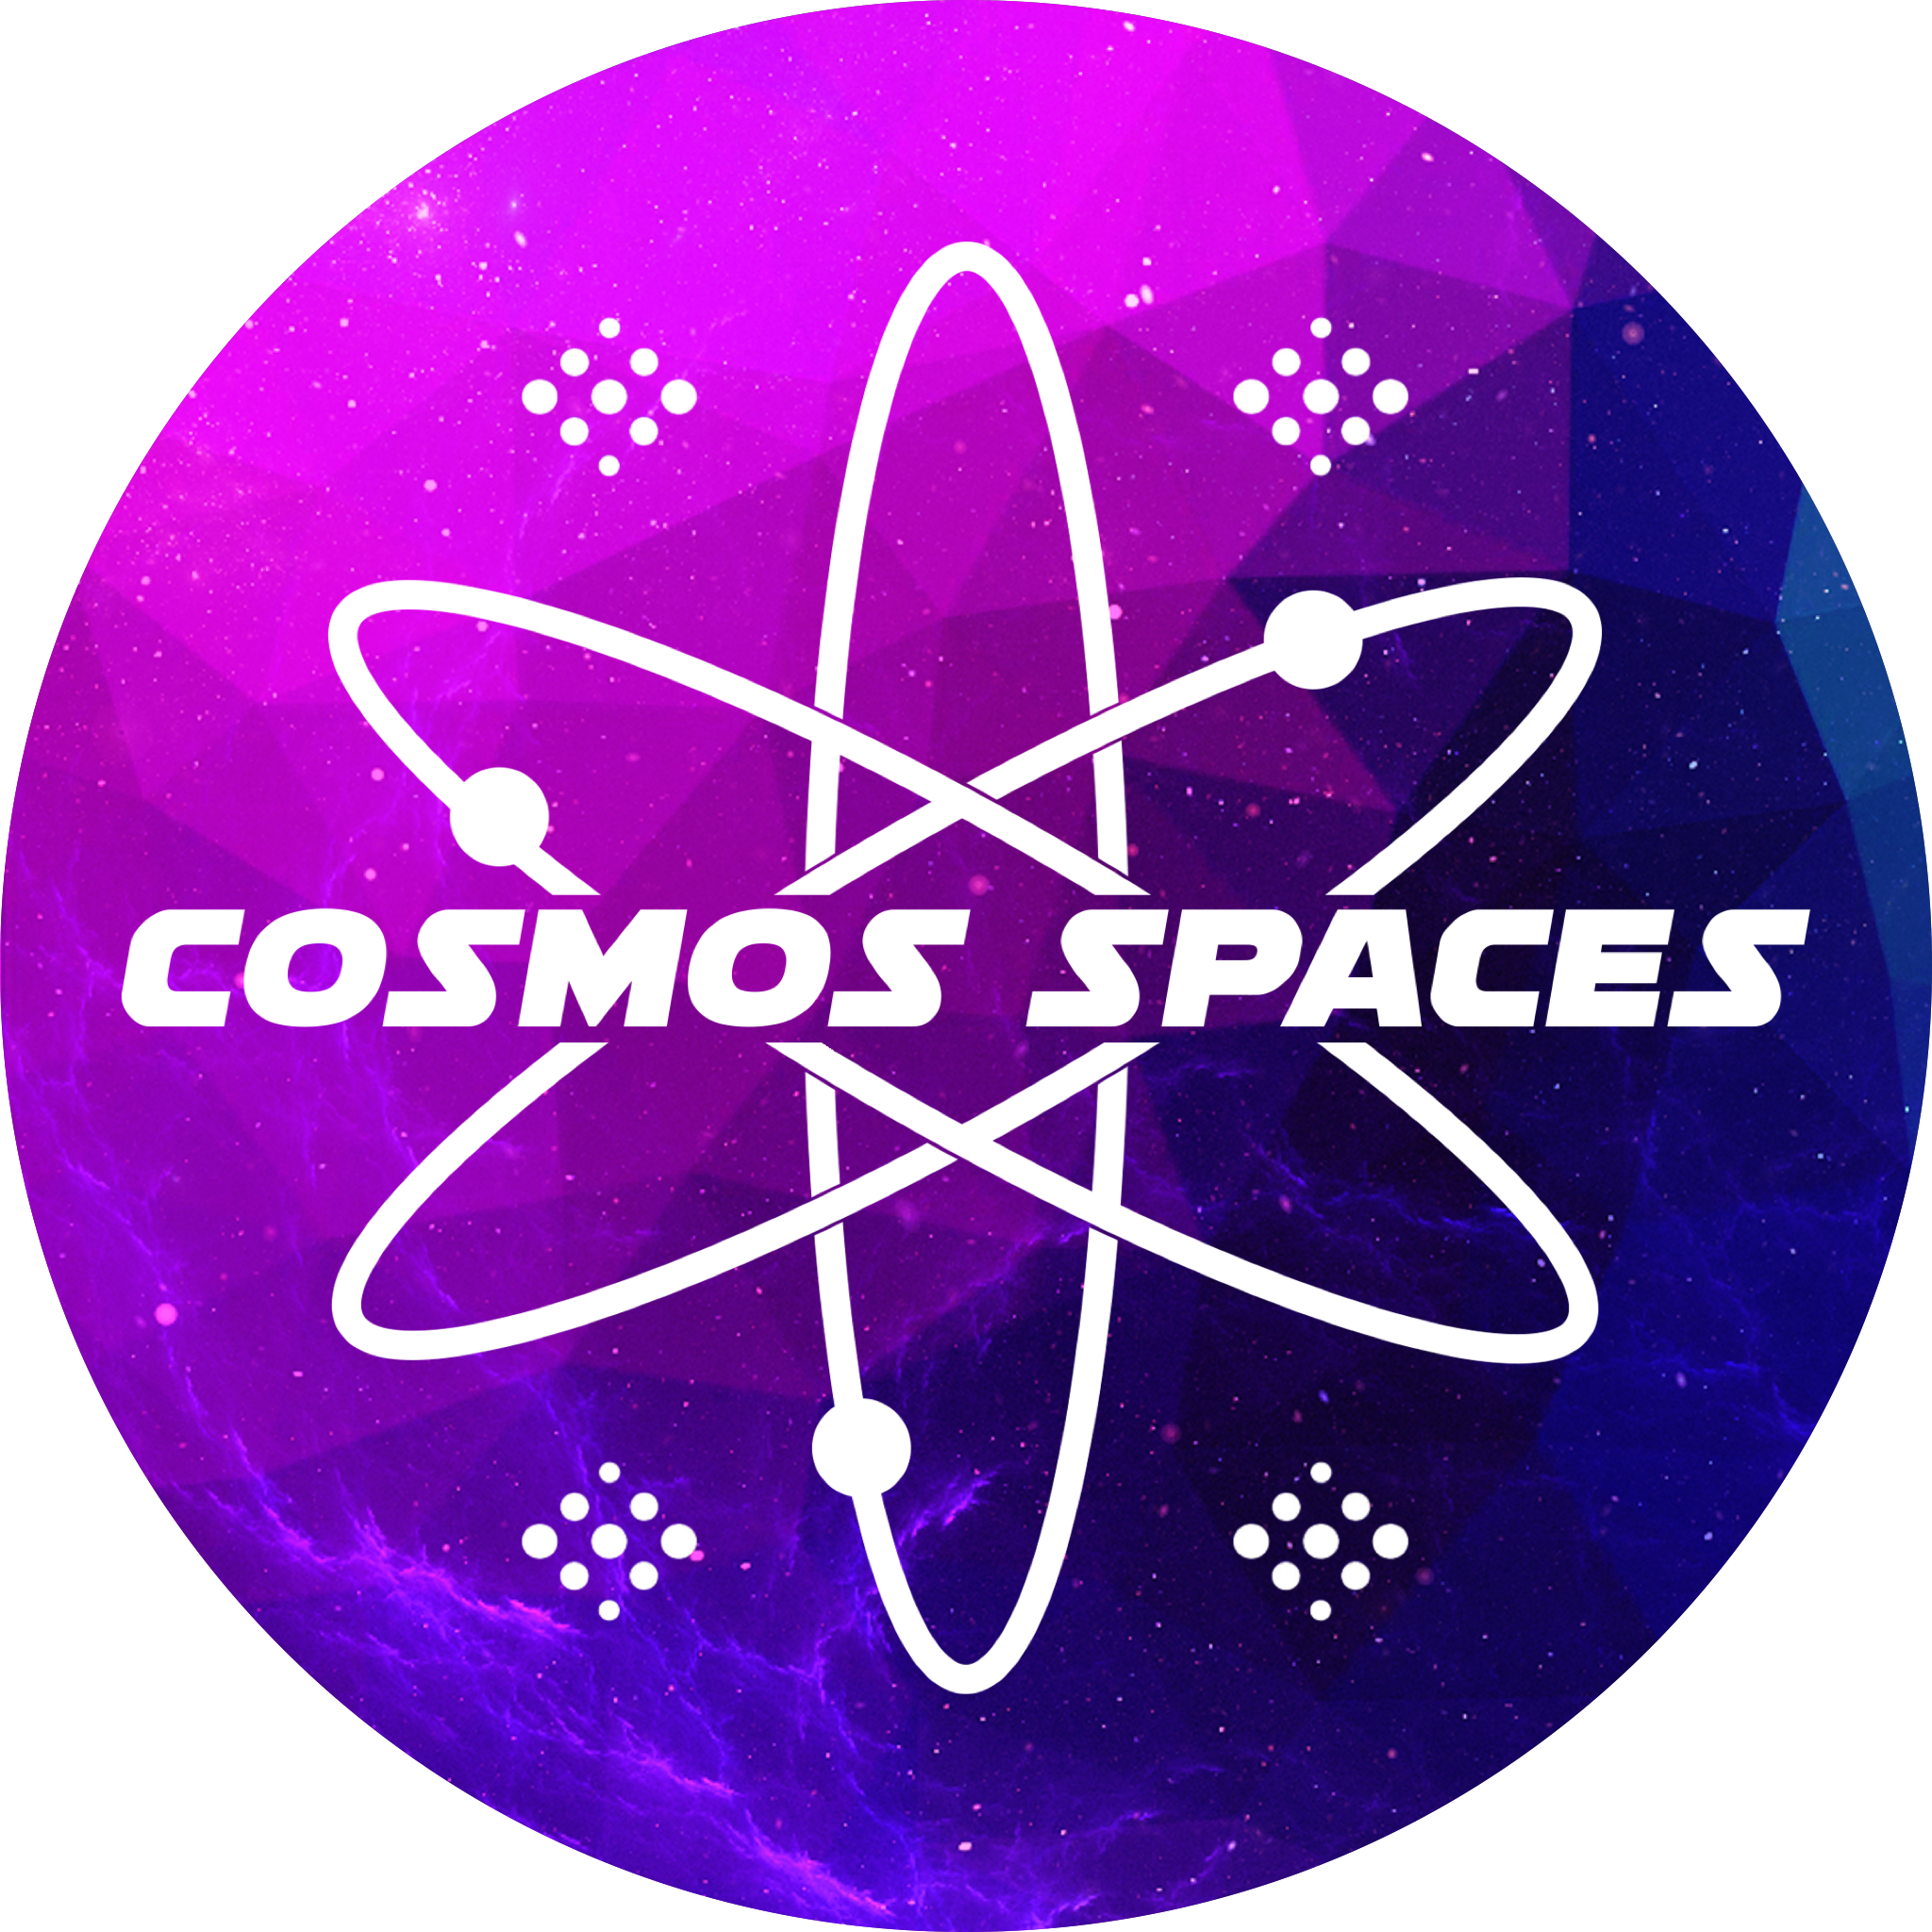 Медиа космос. About Cosmos. Reborn from the Cosmos. Information about the Cosmos. Space media